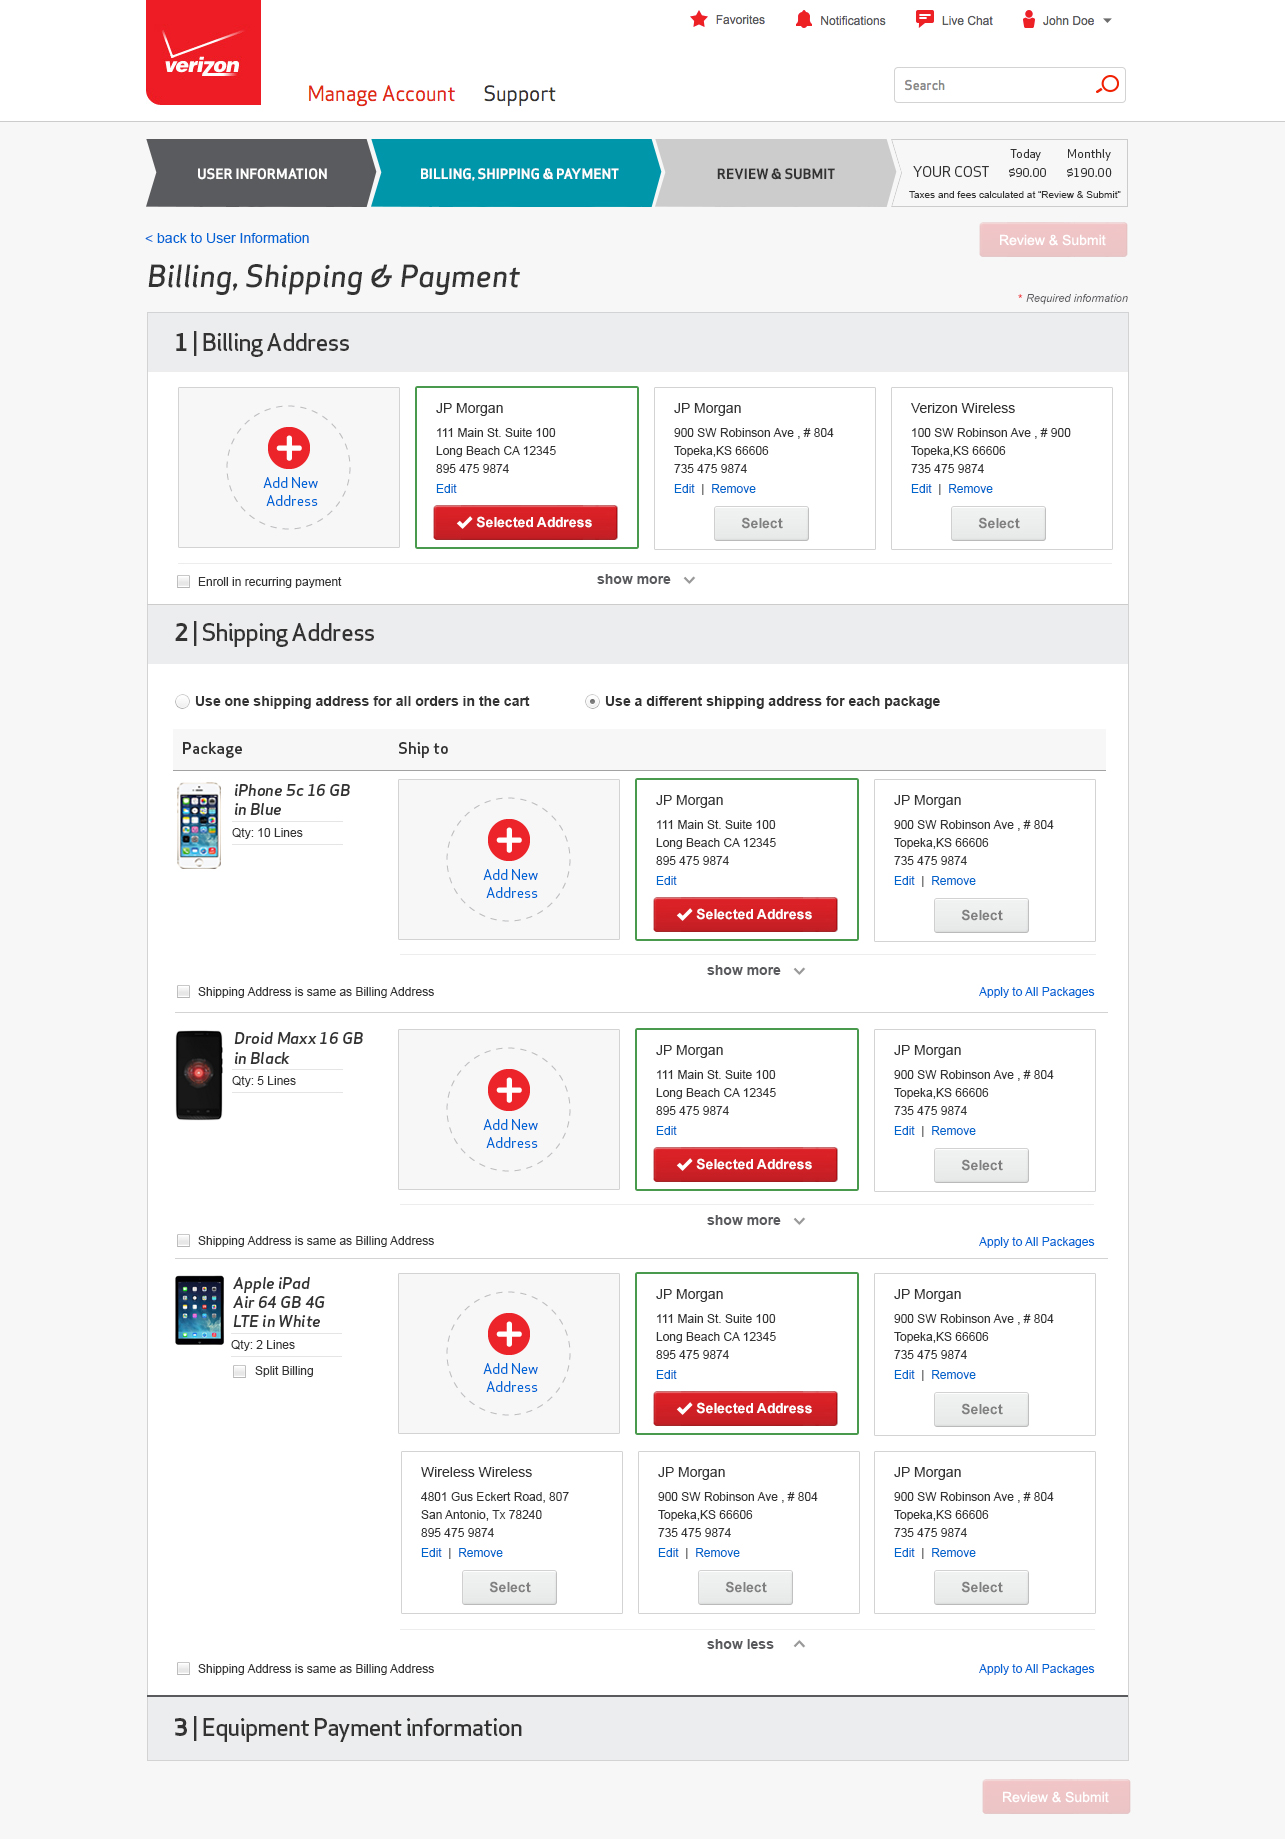 On the existing Verizon My Business portal, saved addresses are displayed in cards view.